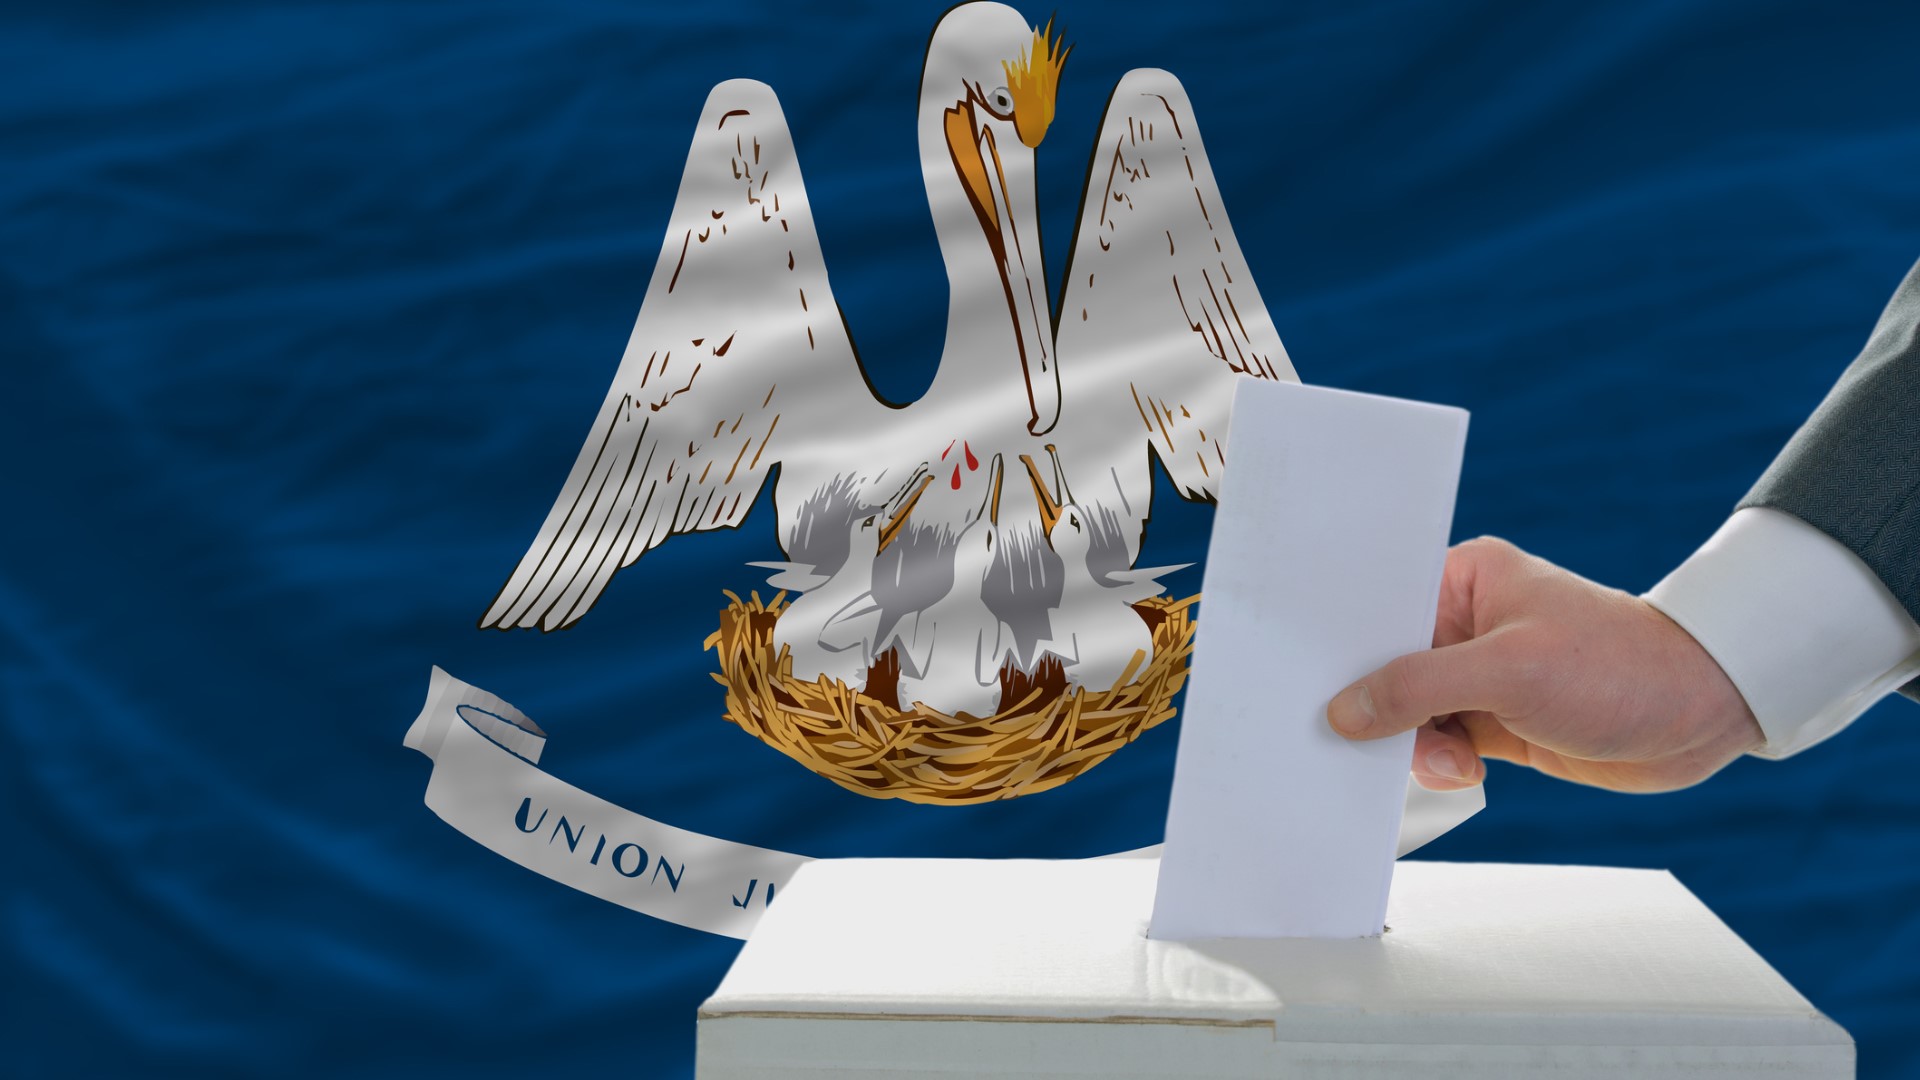 Here's a more in-depth look into what Louisiana voters will see on the ballot Saturday.